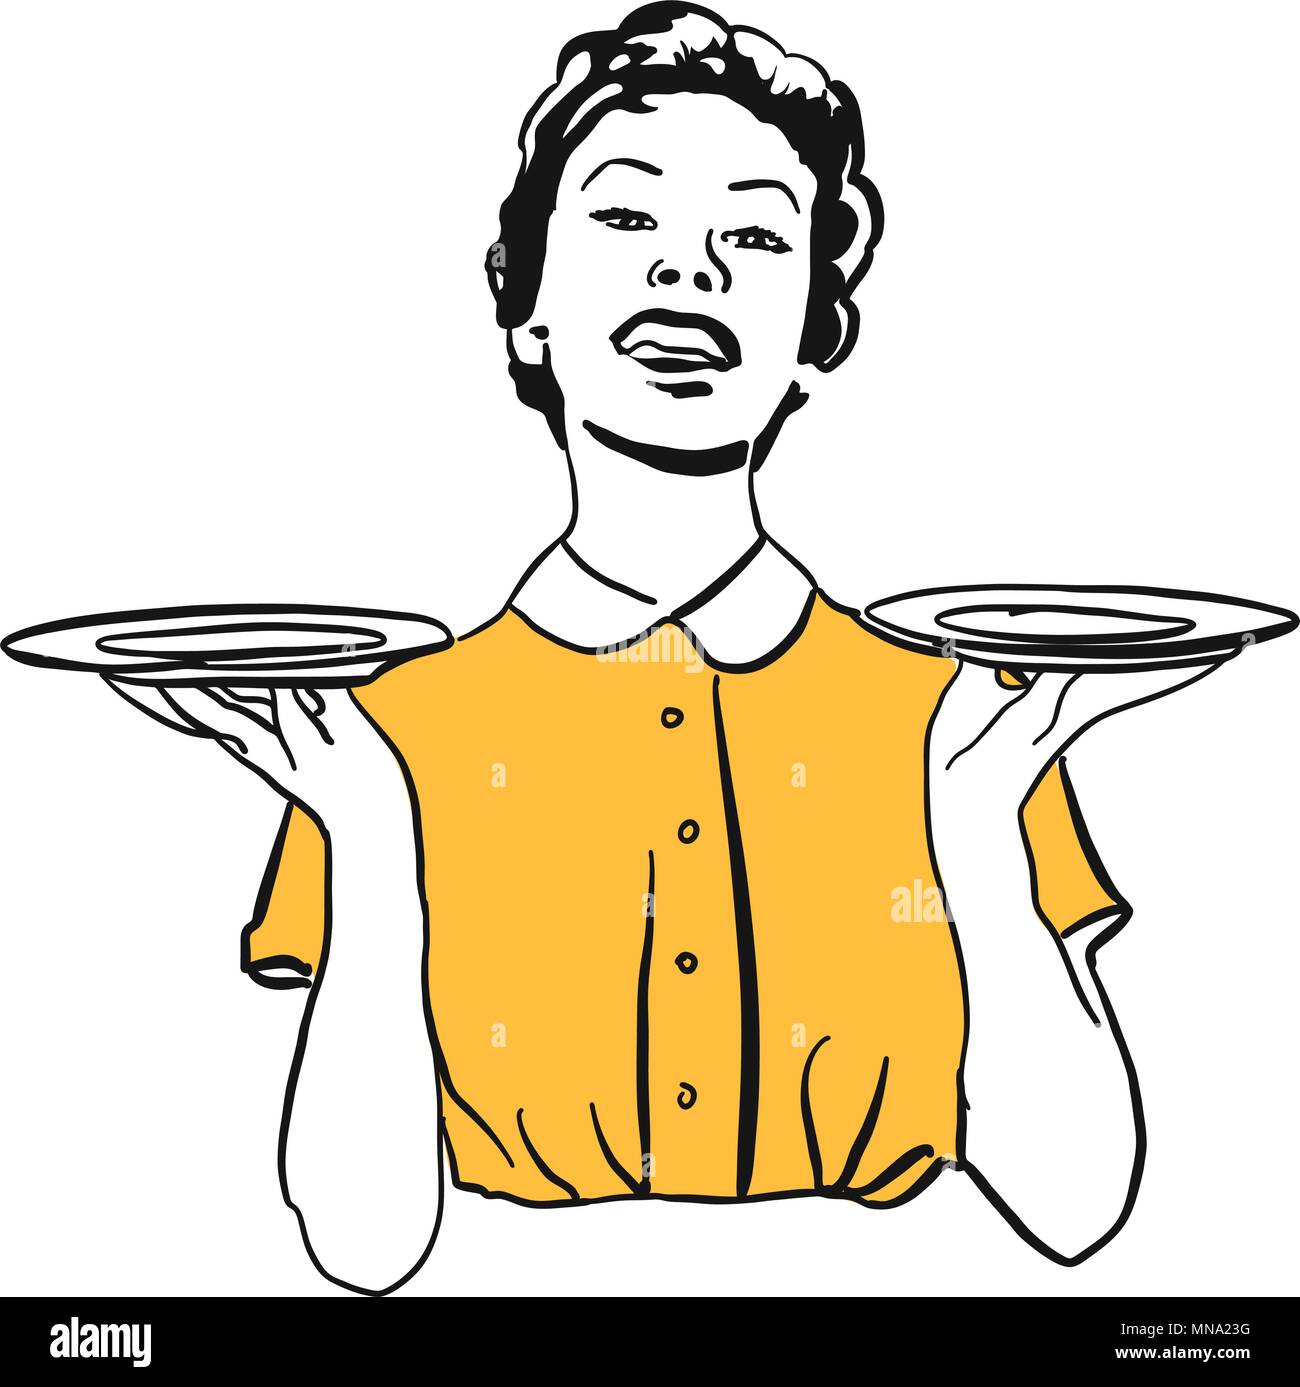 Vintage housewife or waitress balance empty plates, presenting Food or other Products. Hand drawn artwork for any kind of advertising in web ans as pr Stock Vector